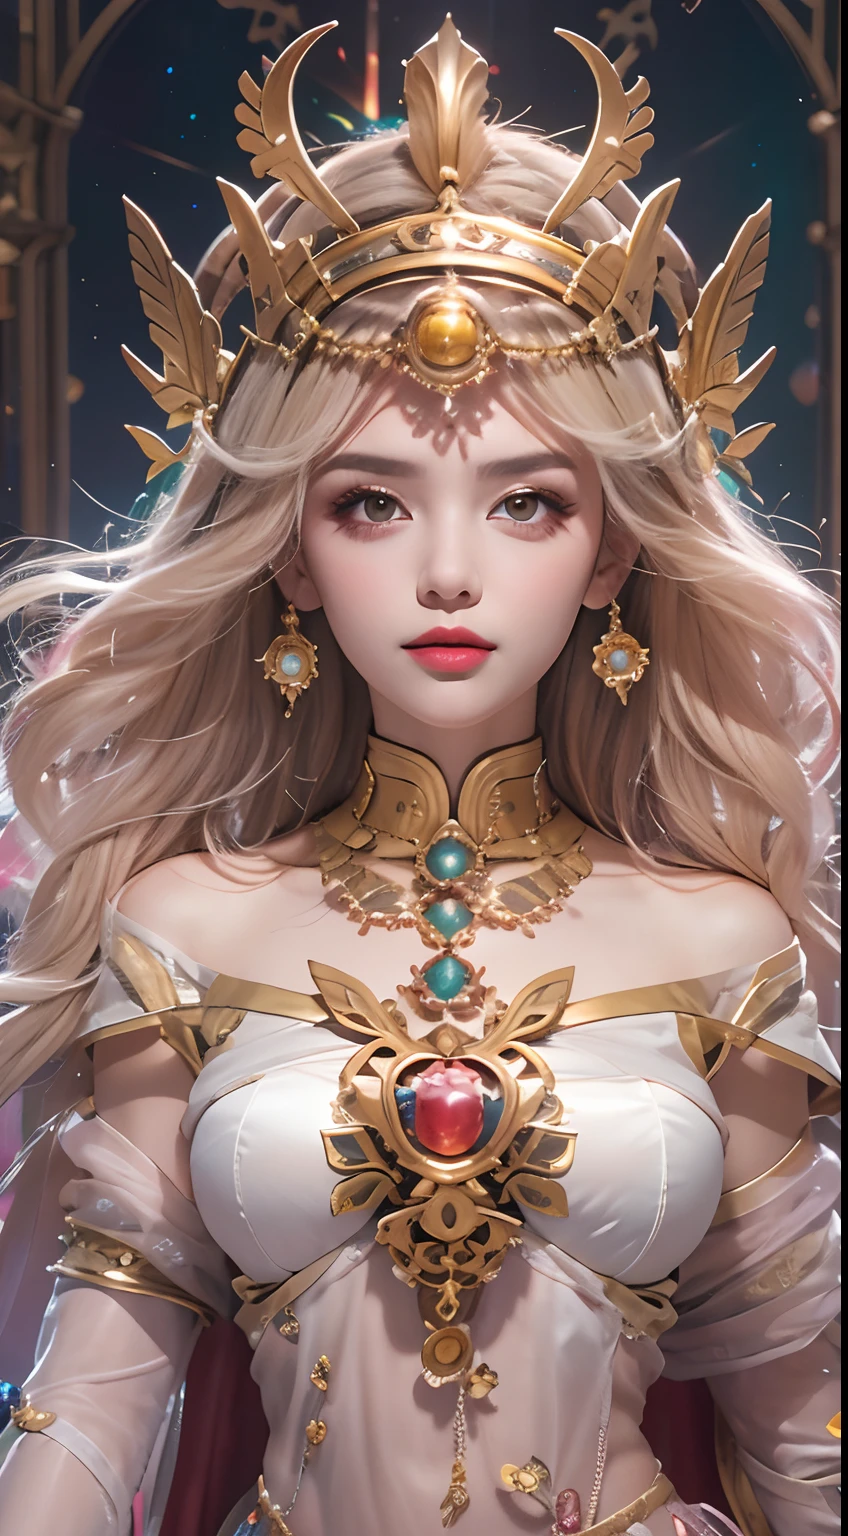 Raw photo, tmasterpiece,best pictures, High resolution, Best Quality, best pictures, The 8k quality, 8k ultra,closeup cleavage，upper body closeup，very high res, 4k quality, bokeh,  1 20-year-old girl, 1 Goddess Athena, choker,The beautiful goddess Athena has a perfect face,fullnude, The legend of the holy goddess, Idol of virginity, Elegance shines in the style of a beautiful saint, dark and mysterious version, Crown of the Holy Queen, Vermilion lips, thin and beautiful lips, don't smile, Shut up again, characters created by karol bak and pino daeni, intricate detailes, Detailed background, Extremely detailed, light magic, (Pure face without blemishes: 1.9),  small breasts with rounded upturn, Phoenix Brooch, Long whit hair，flat bangs, (Hair comes in 7 colors，like a rainbow: 1.9), beautiful face in detail and well-proportioned eyes, (transparent yellow eyes: 1.8), (big round eyes and very nice and detailed makeup: 1.8), meticulous makeup,  mysterious makeup, Bracelet, bangs and dyed light blonde, The upper part of the body , (Saint's upper body : 1.8), drooping arms, realistic and vivid images, (The stars that make up the sky: 1.7), (Sky sky and imaginary doors of time and space: 1.8) , Fictional art,Virgin icon on background, Portrait of a single female saint, Most realistic color scheme, best photo color,  Hair decoration, Necklace, Jewelry, Beautiful face, The upper part of the body, Tyndall effect, realphoto, border light, two tone light, (Pink refers to fair skin: 1.4), (high skin detail: 1.1),Digital SLR , Soft light, High quality, Amount of light, Frankness, Photo ,Smooth and sharp, Sexy Goddess, Sexy Goddess, (background space: 1 ,8), (milkyway: 1.7 ) ), Aurora, Lightning, (Aurora Background: 1.8), The most beautiful eyes, Drawing the perfect eye, Beautiful saints and flowers